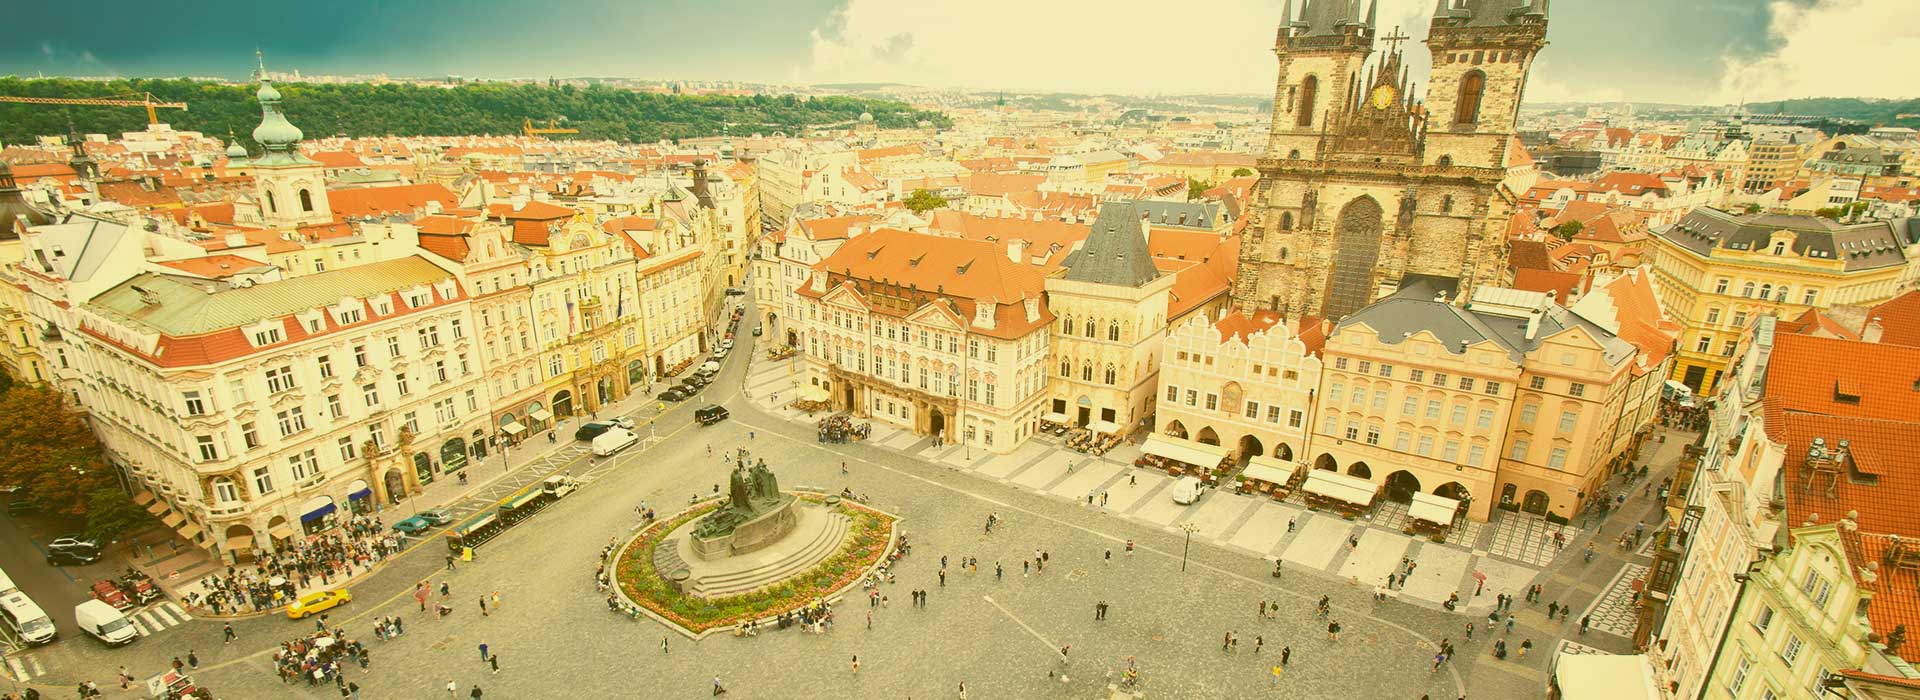 Things to do in prague